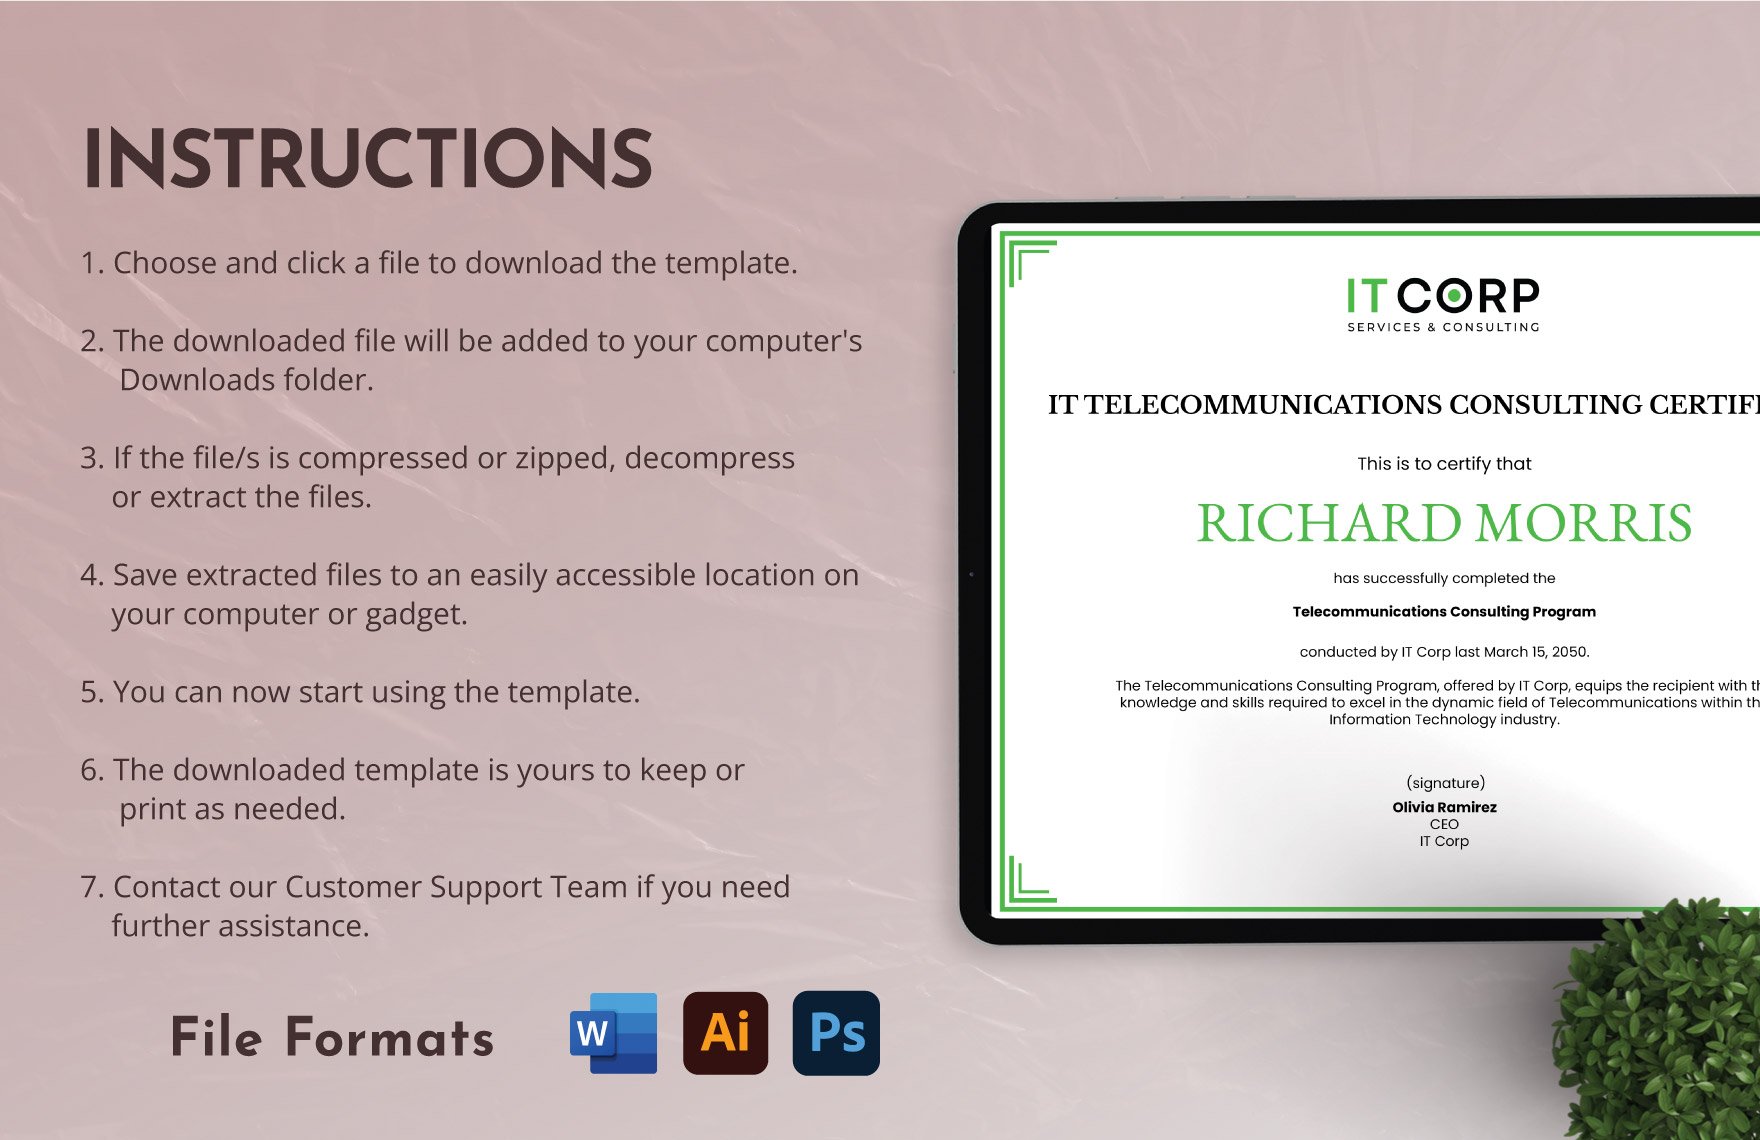 IT Telecommunications Consulting Certificate Template